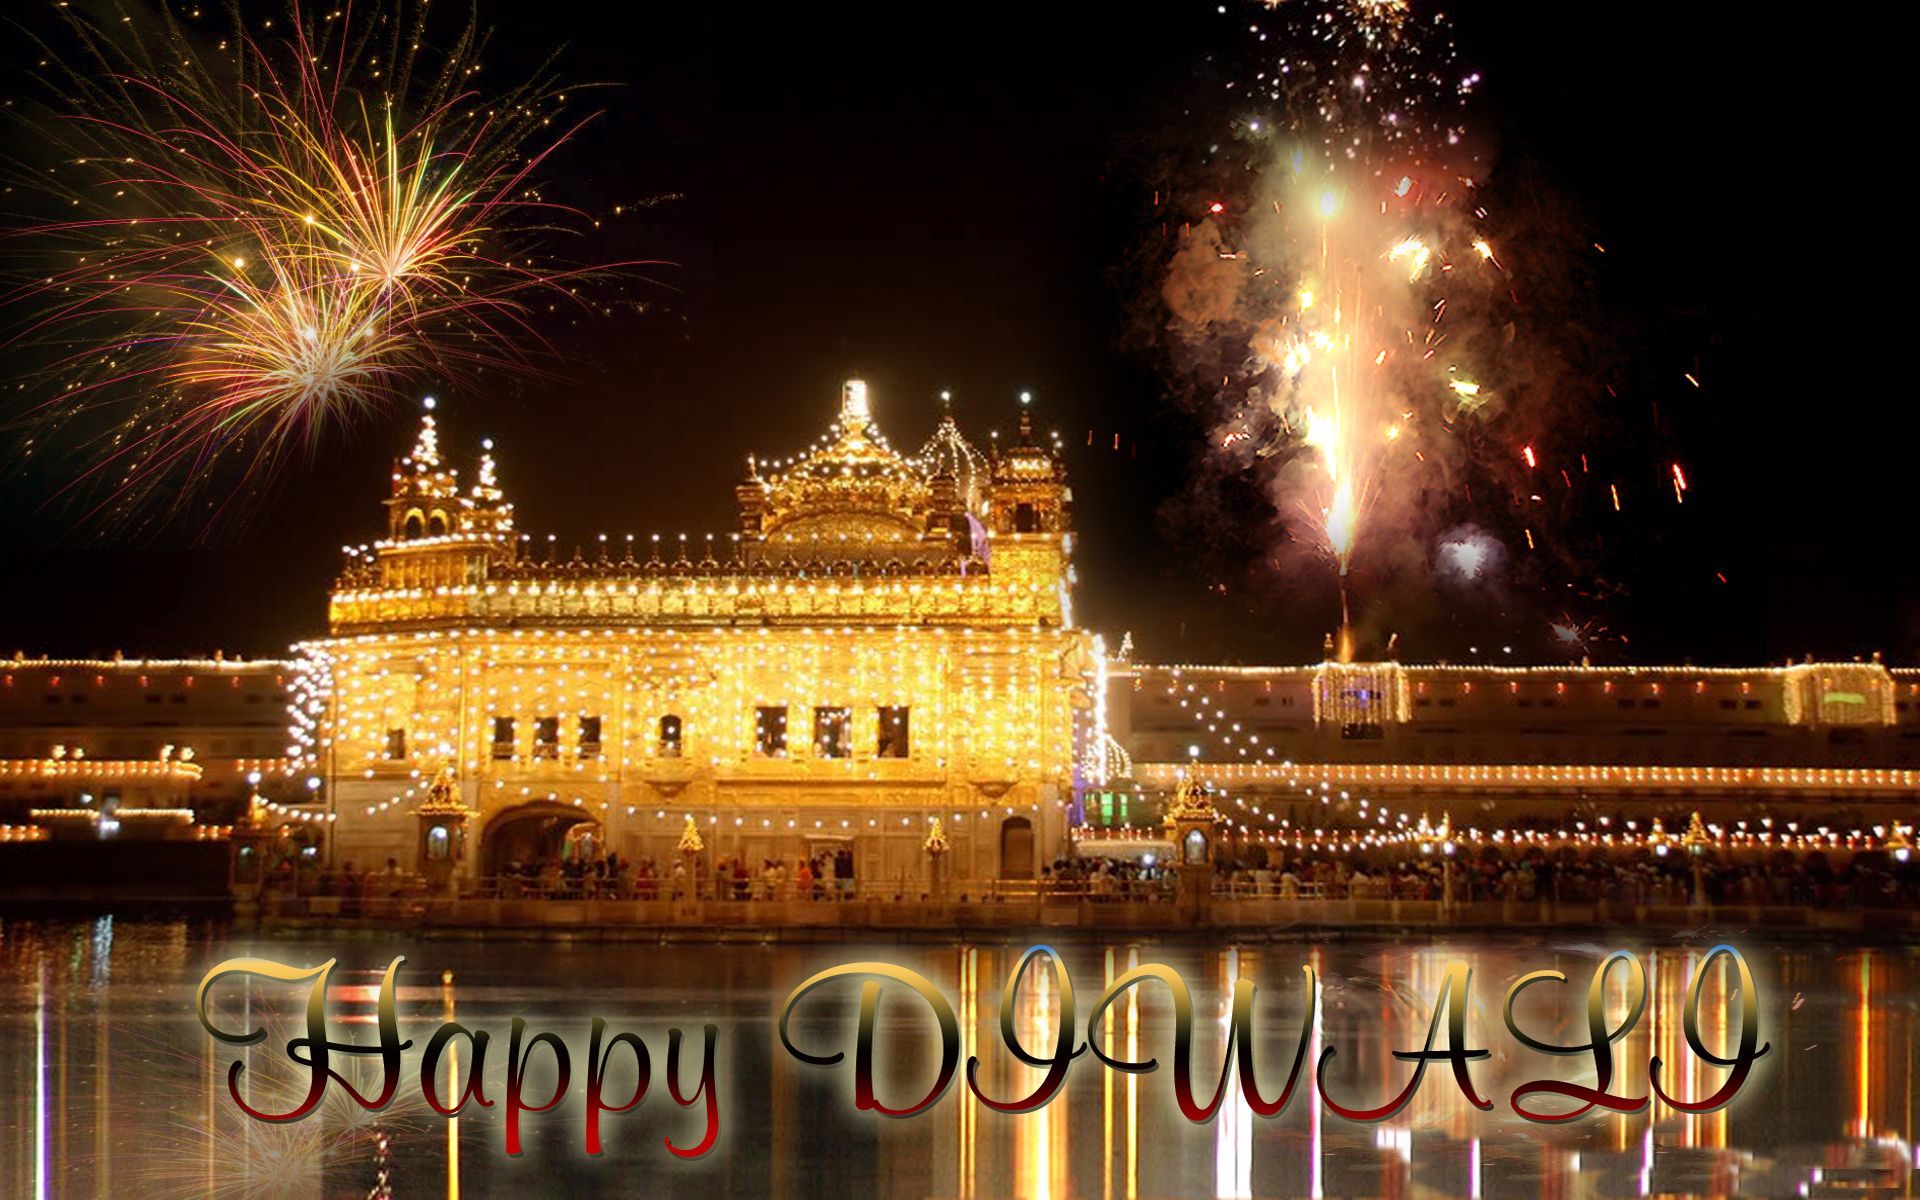 Wish You and Your Family a Very Happy Diwali & Prosperous New Year